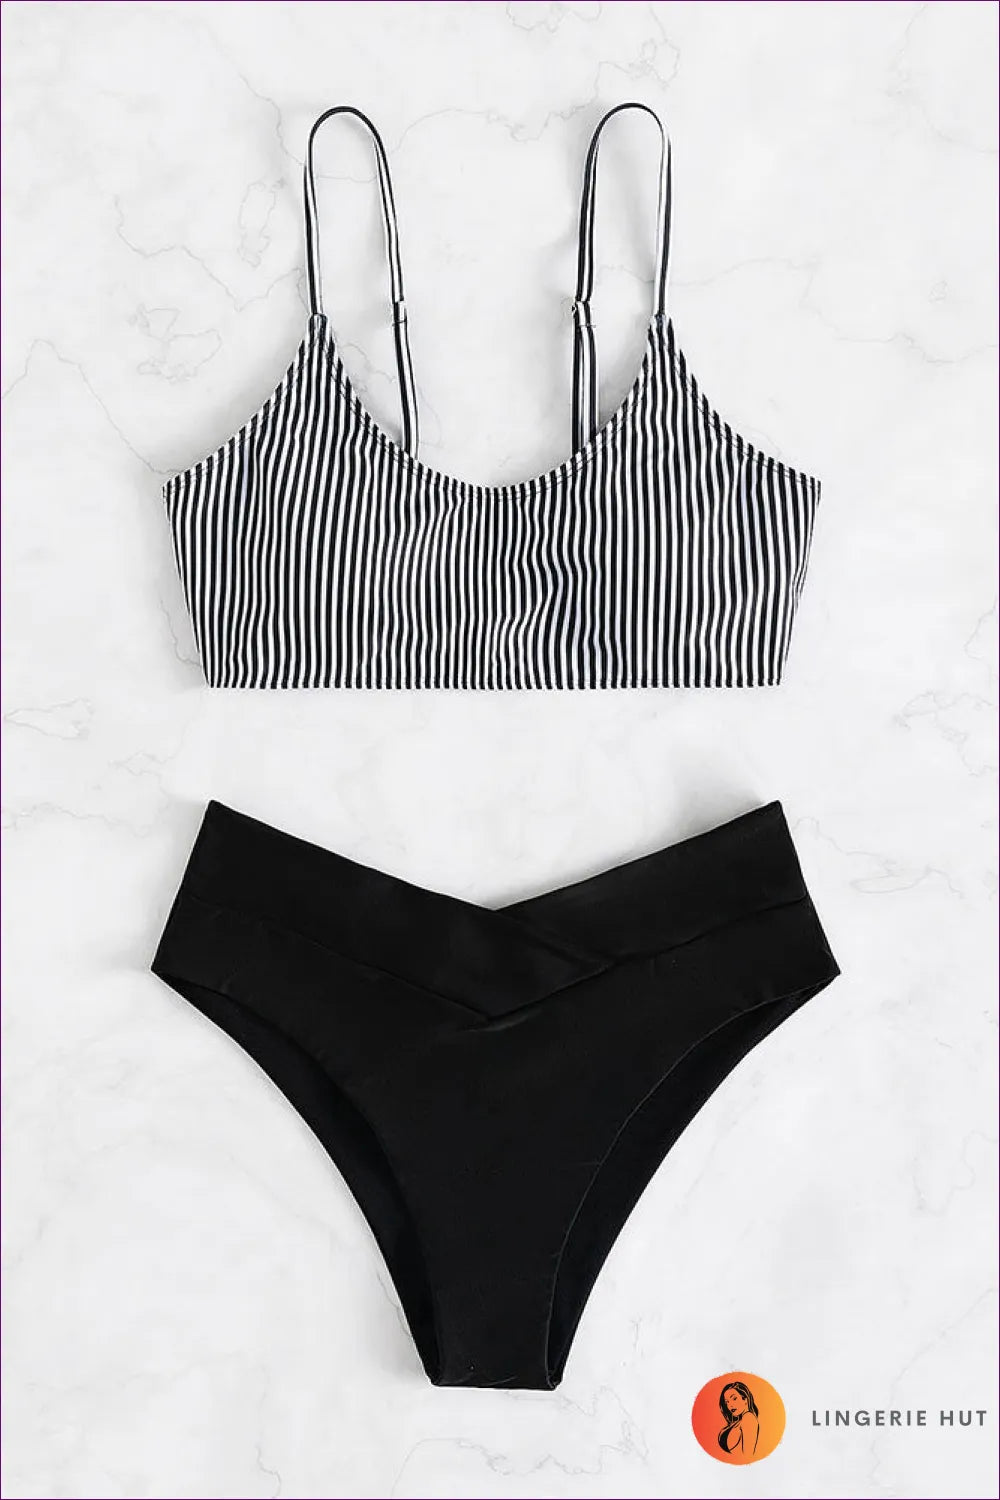 Embrace Sunny Adventures With Our Striped High Waist Triangle Bikini. Dive Into Style Its Playful Stripes